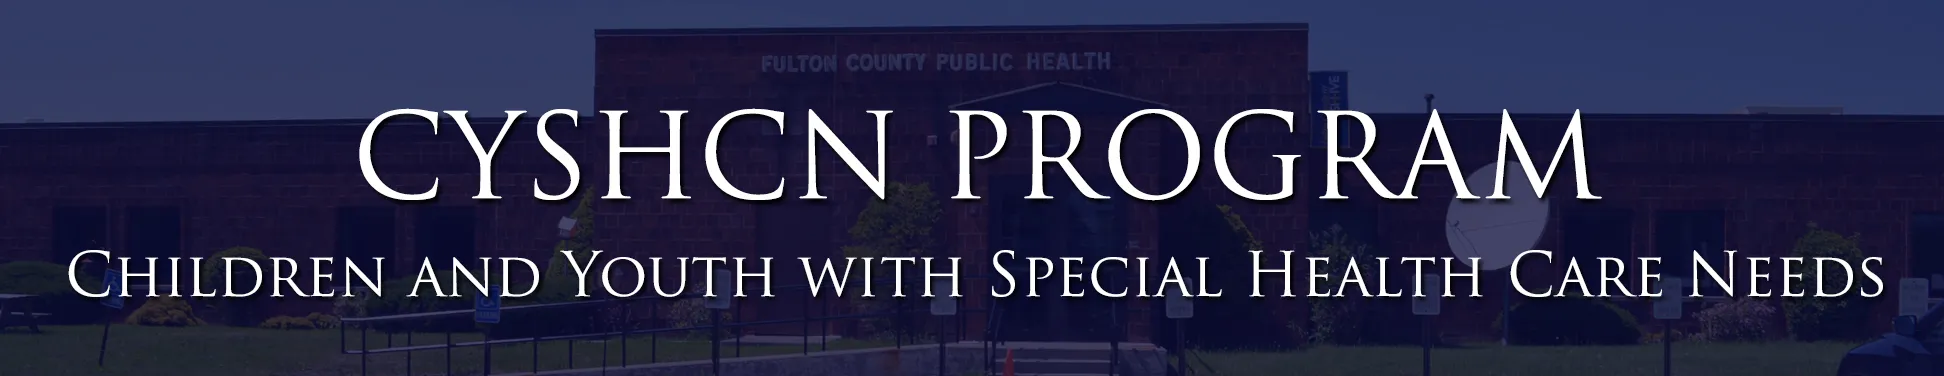 Public Health Children and Youth with Special Health Care Needs Program